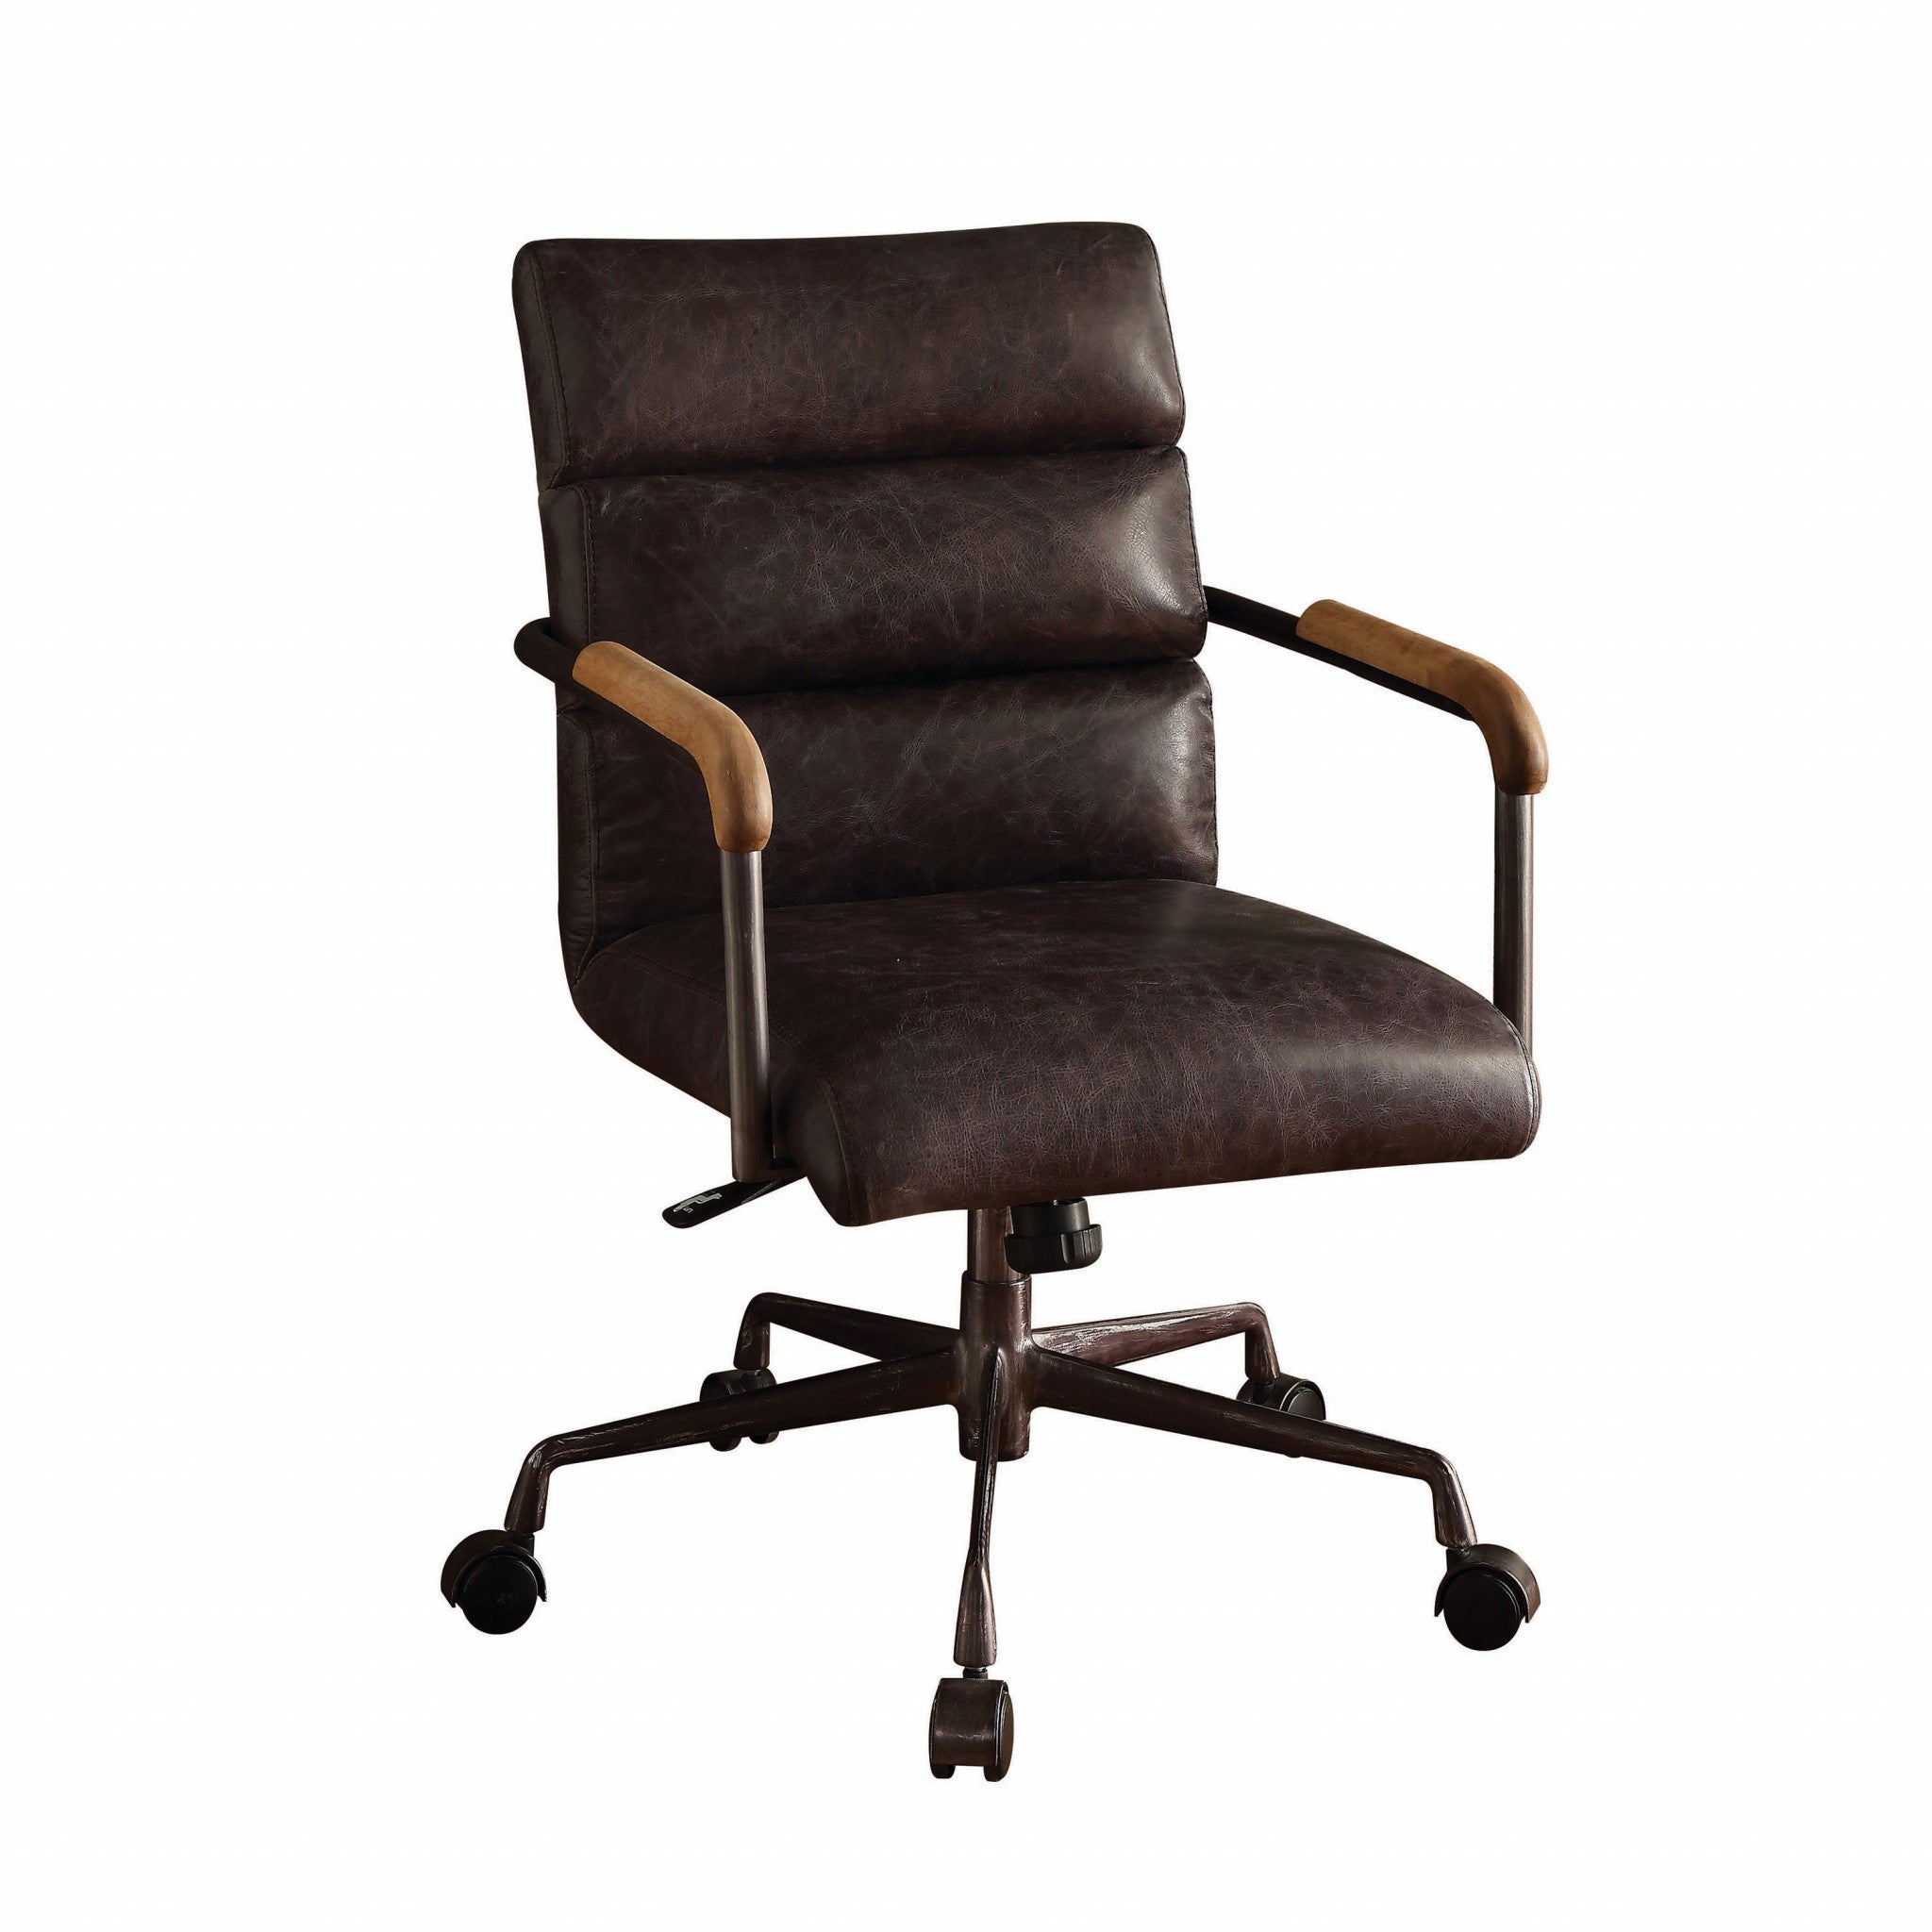 24" X 28" X 37-40" Cocoa Top Grain Leather Office Chair